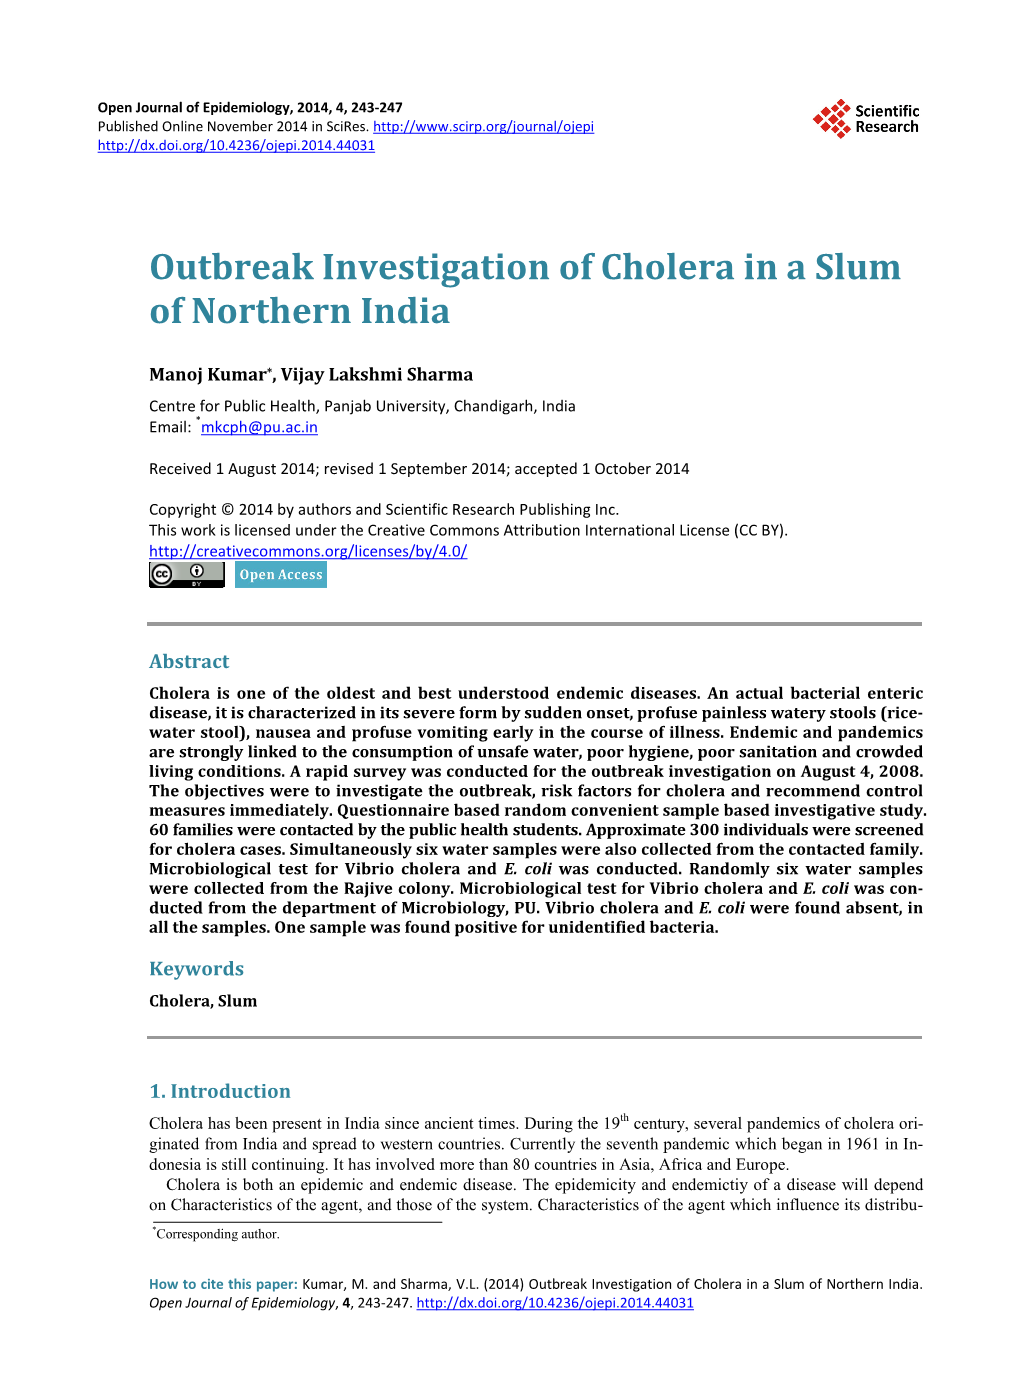 Outbreak Investigation of Cholera in a Slum of Northern India